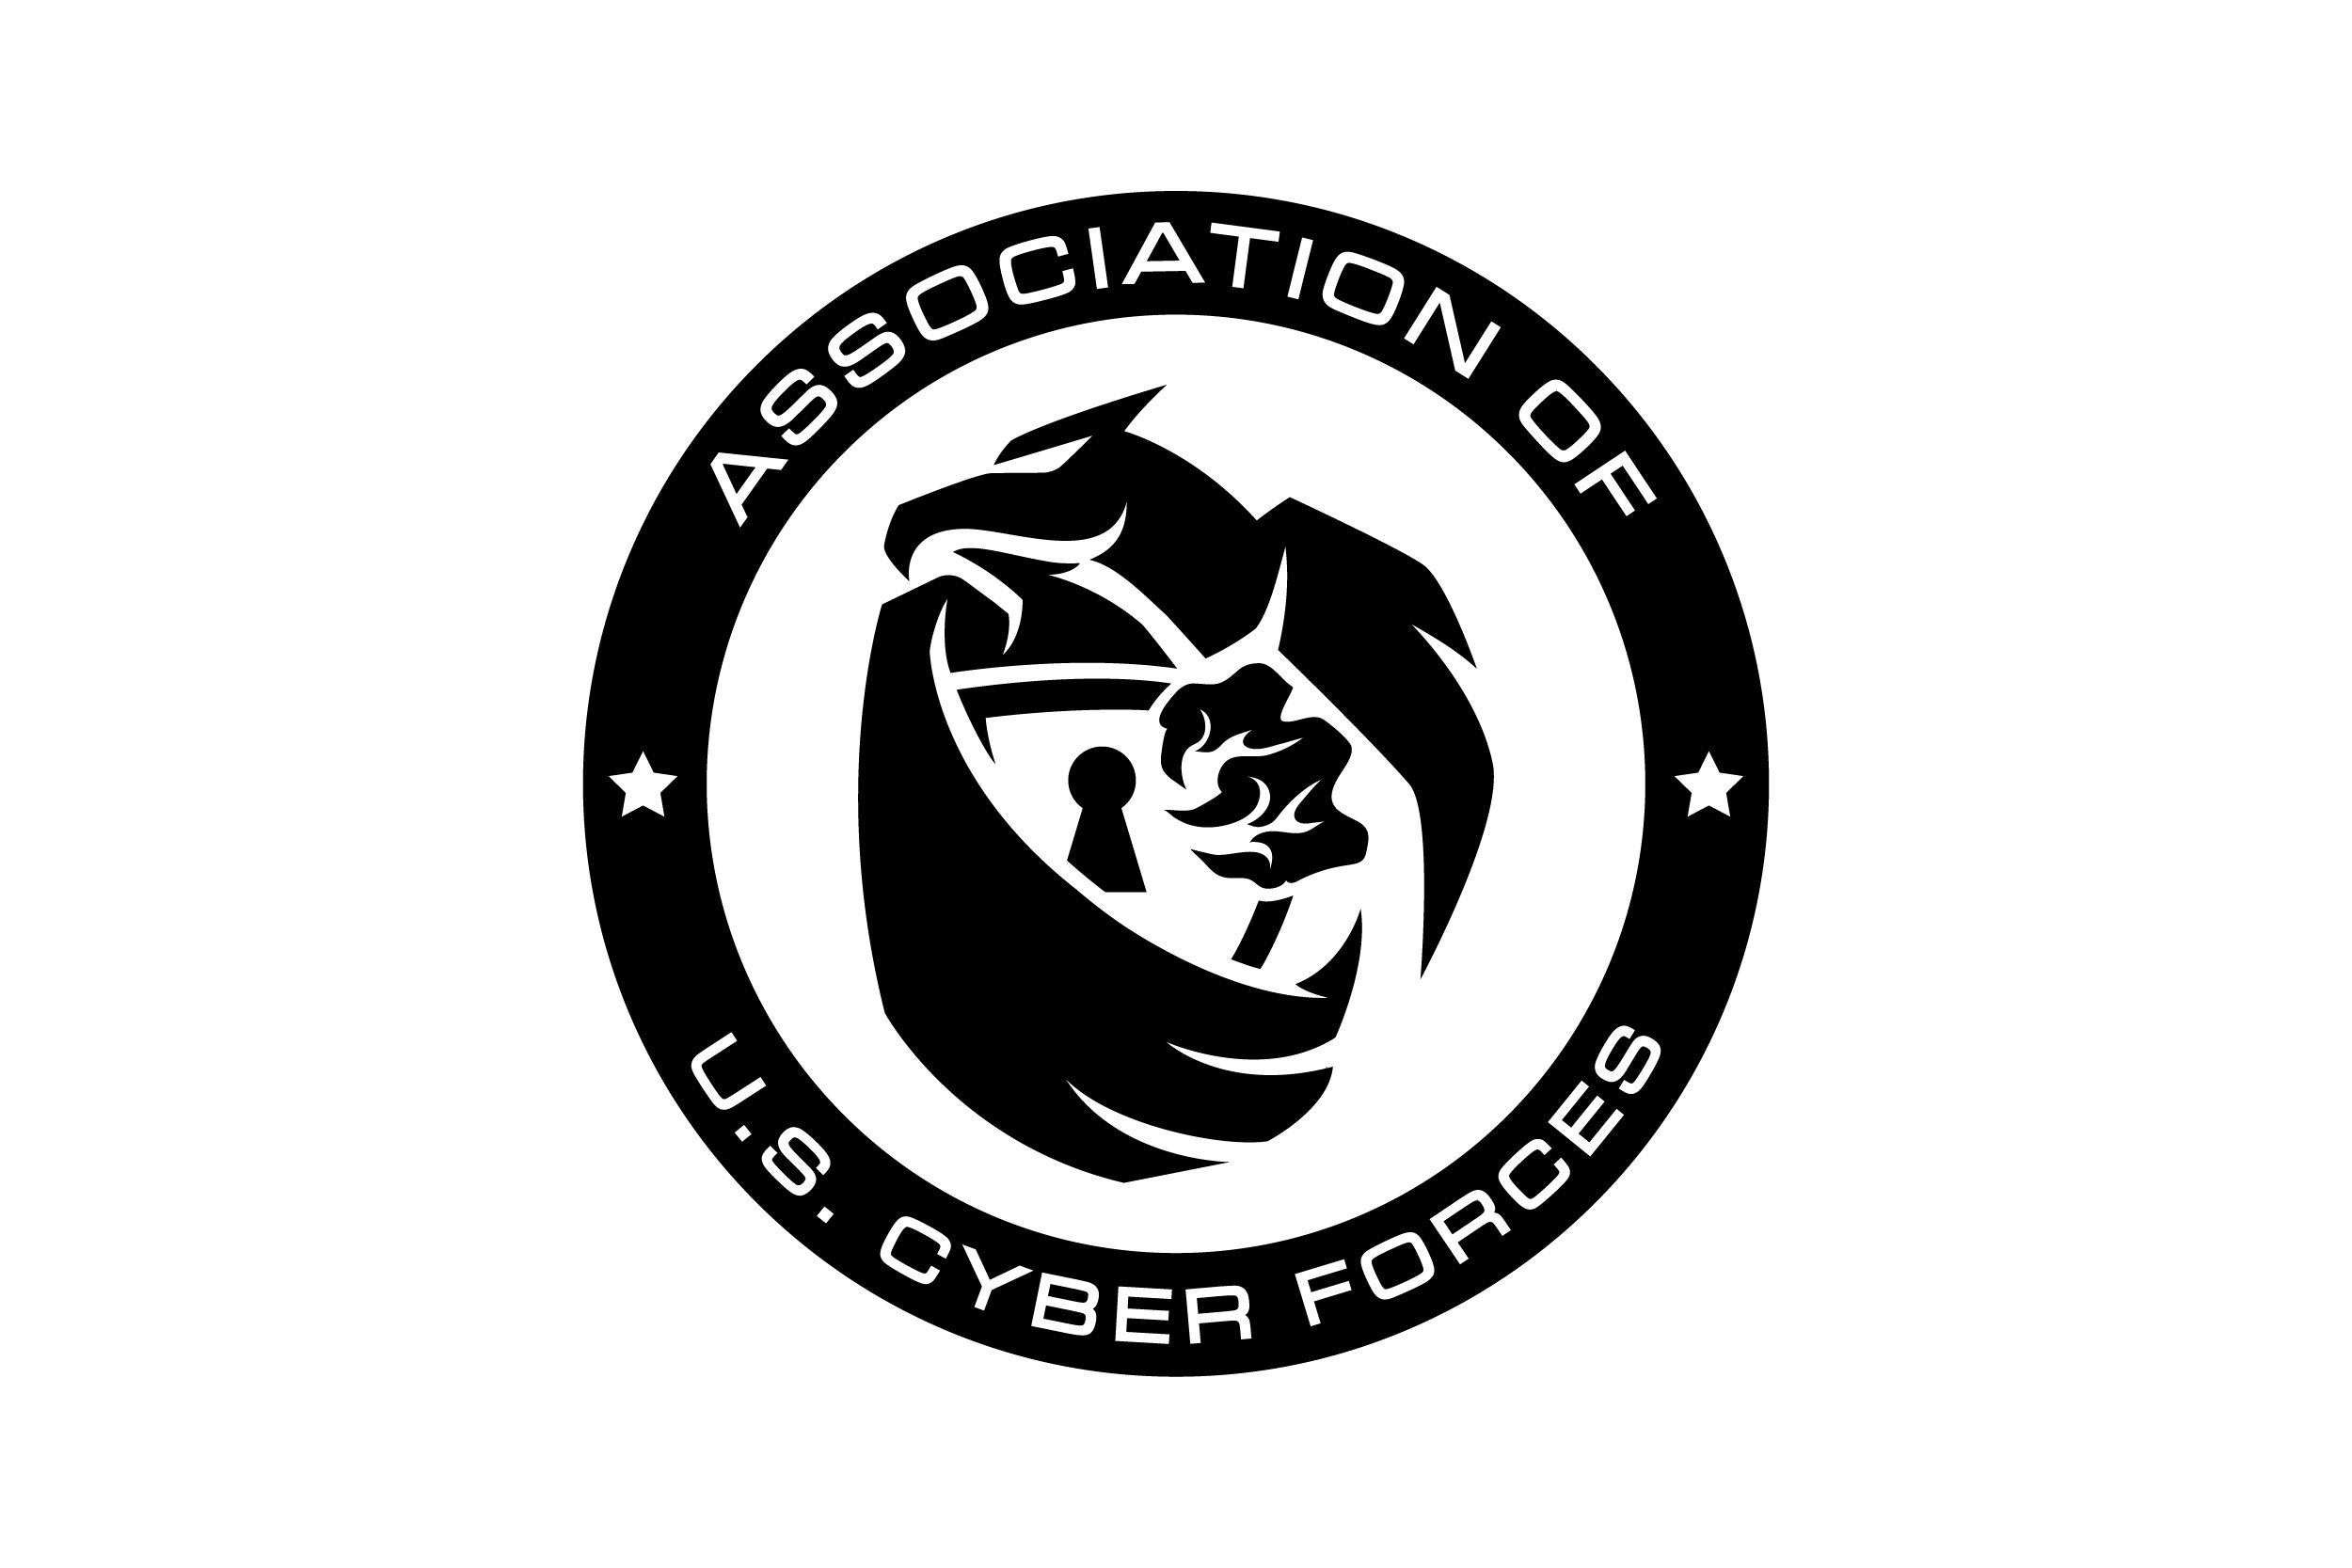 Association-of-US-Cyber-Forces